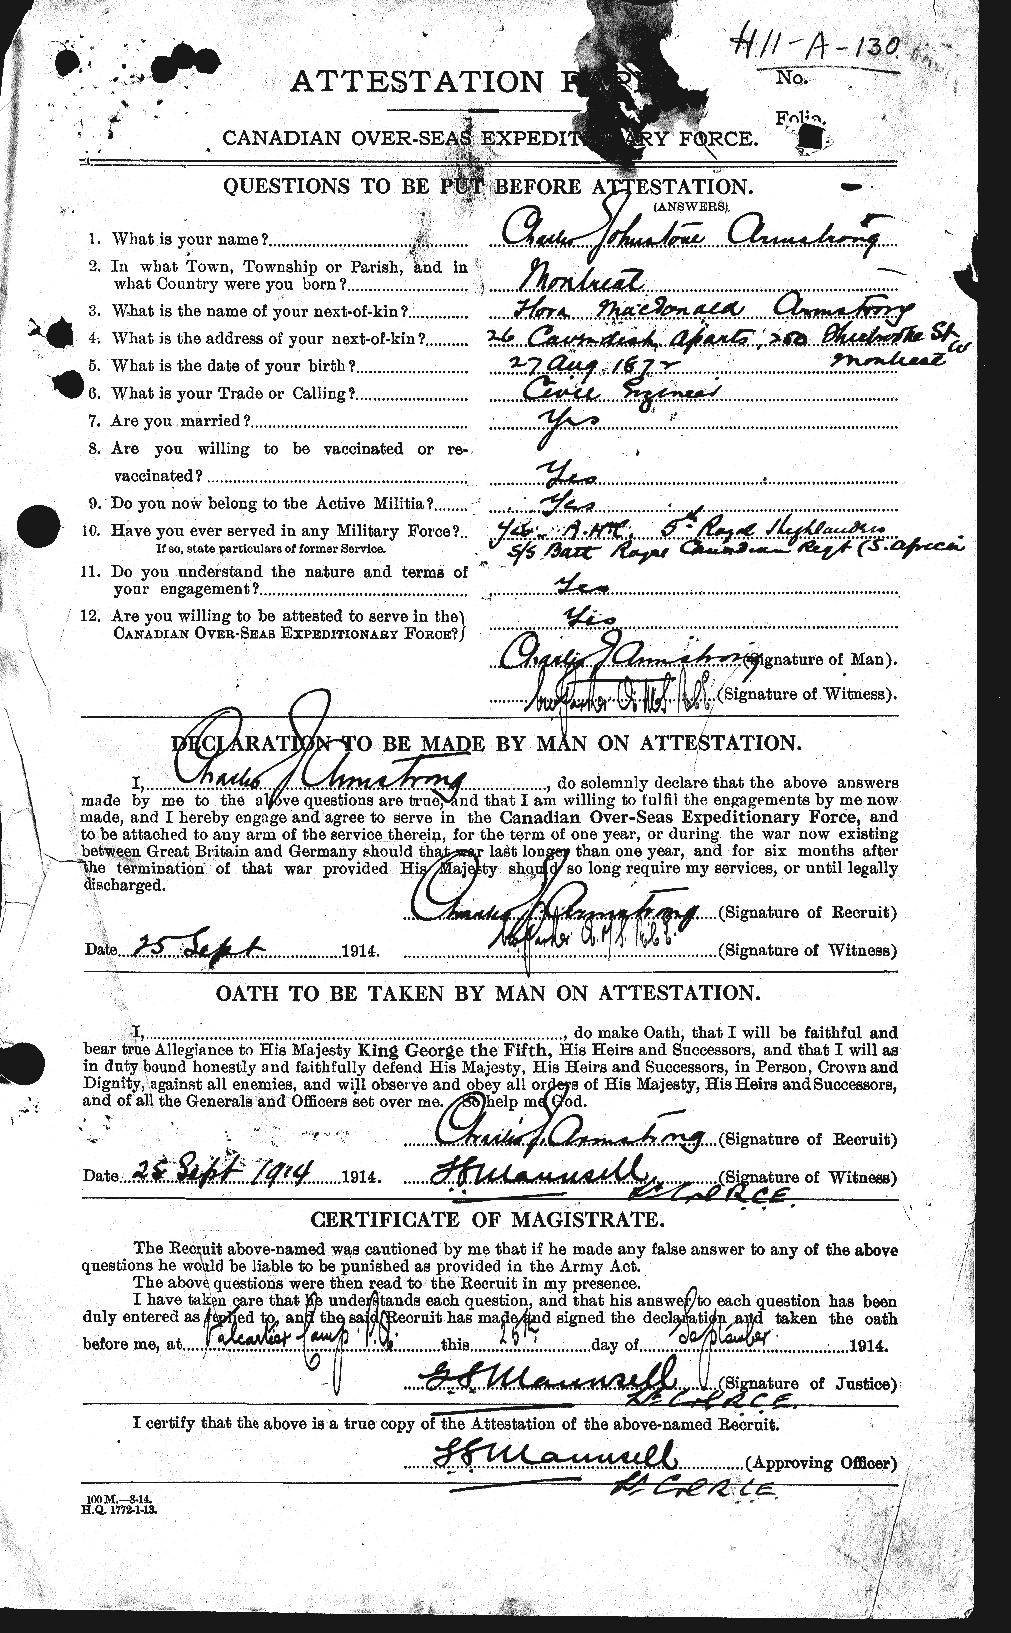 Personnel Records of the First World War - CEF 213906a